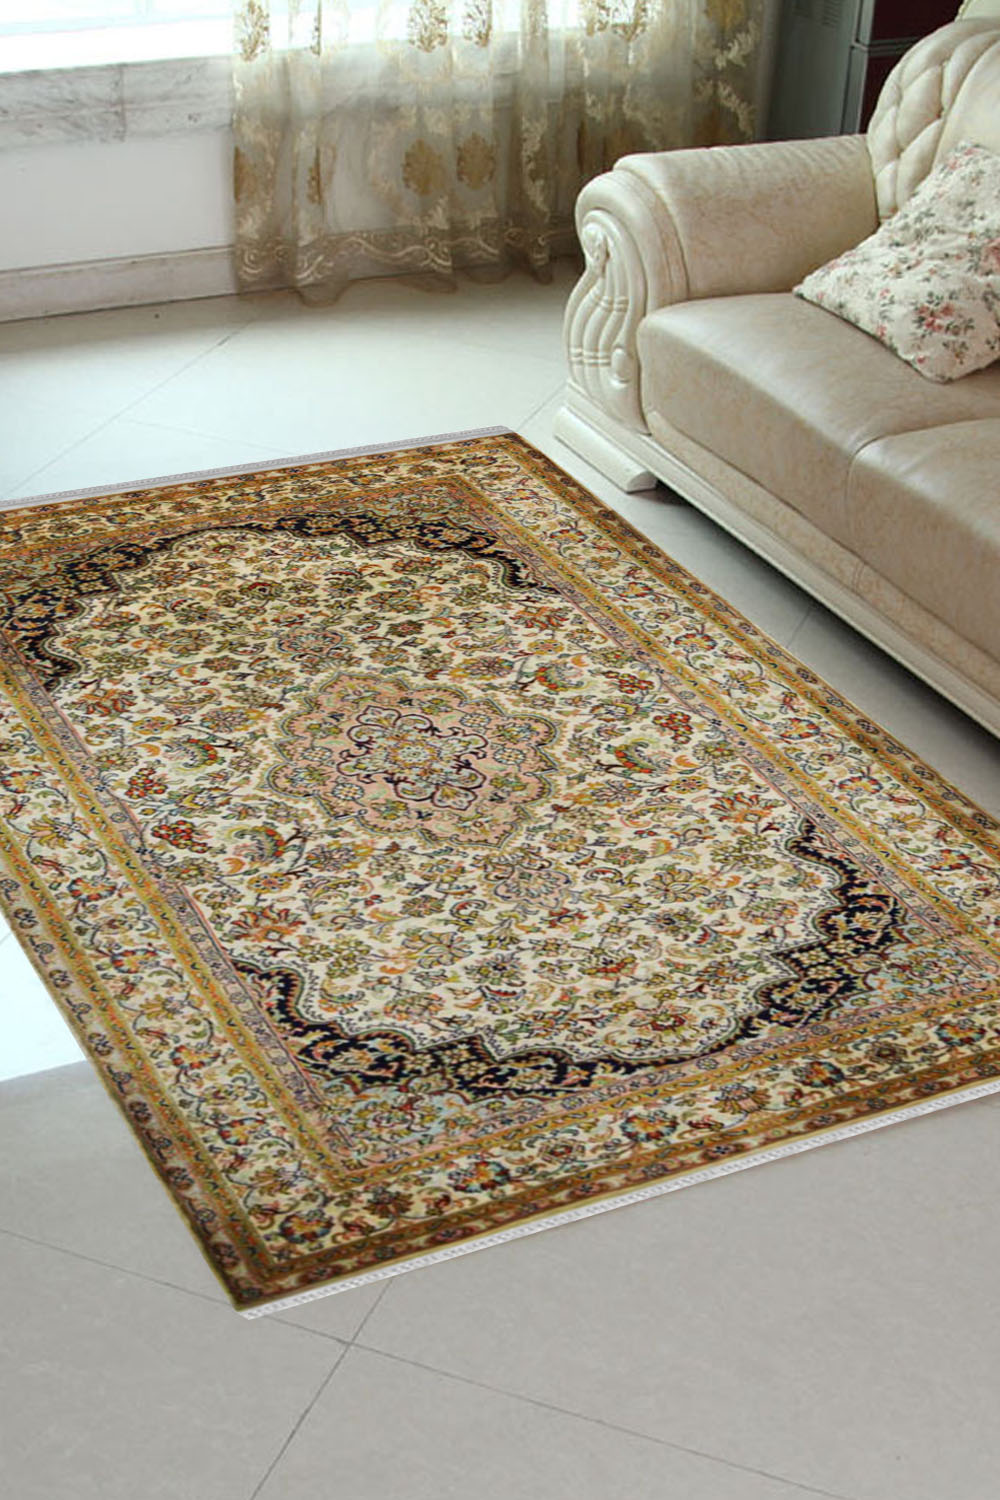 Shop area rugs online and Ivory Gold Jewel Kashan Rug in gold color